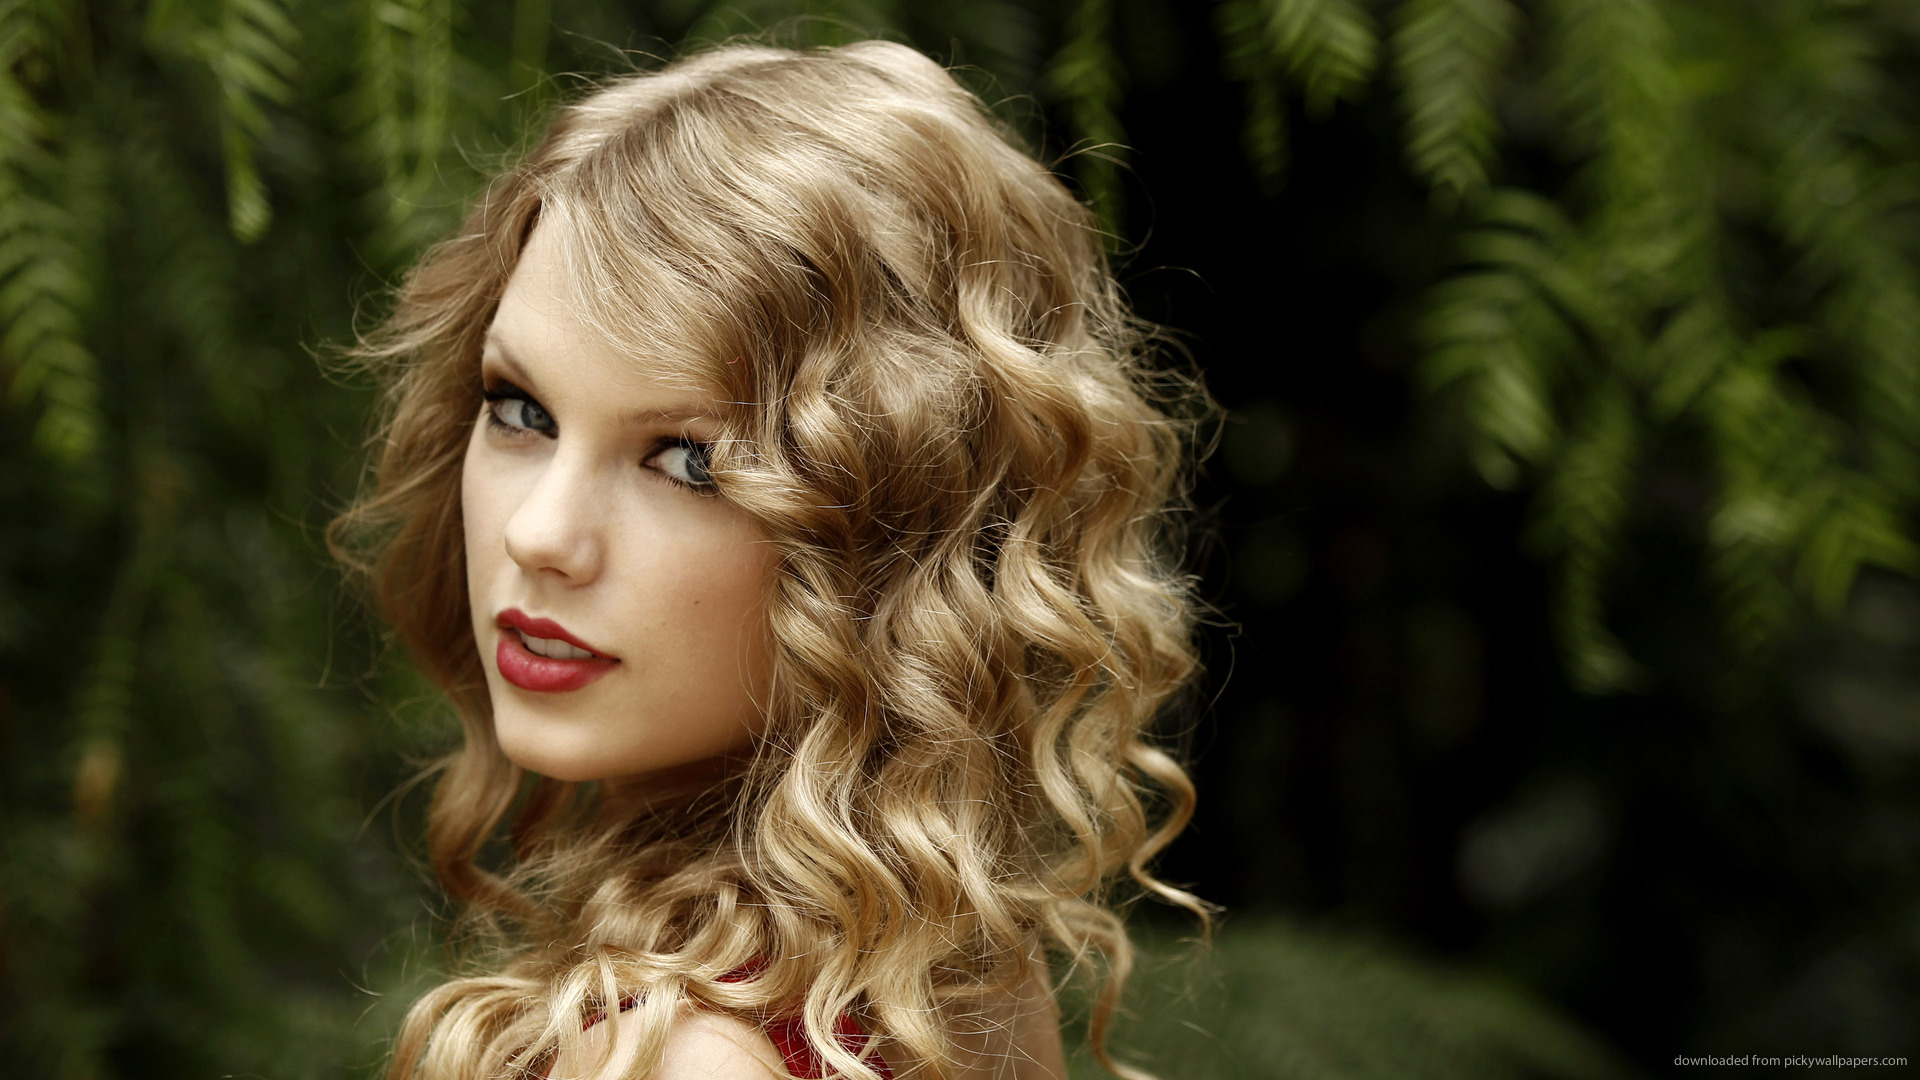 Taylor Swift Curly Hair Look Back Wallpaper For Blackberry Style